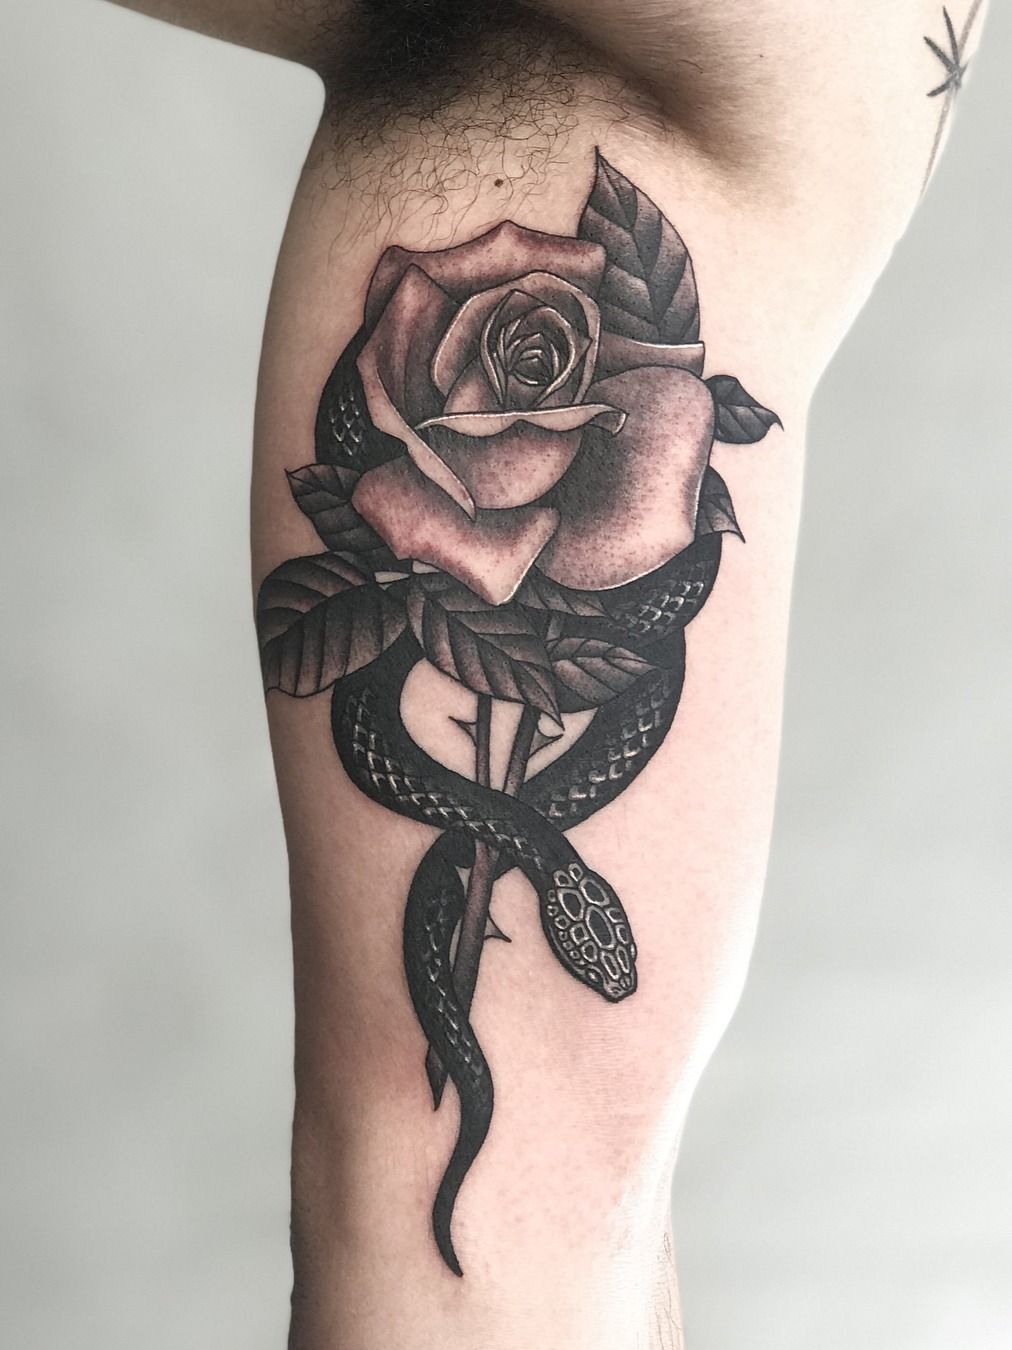 50 Simple Tiny Small Rose Tattoo Ideas for Women